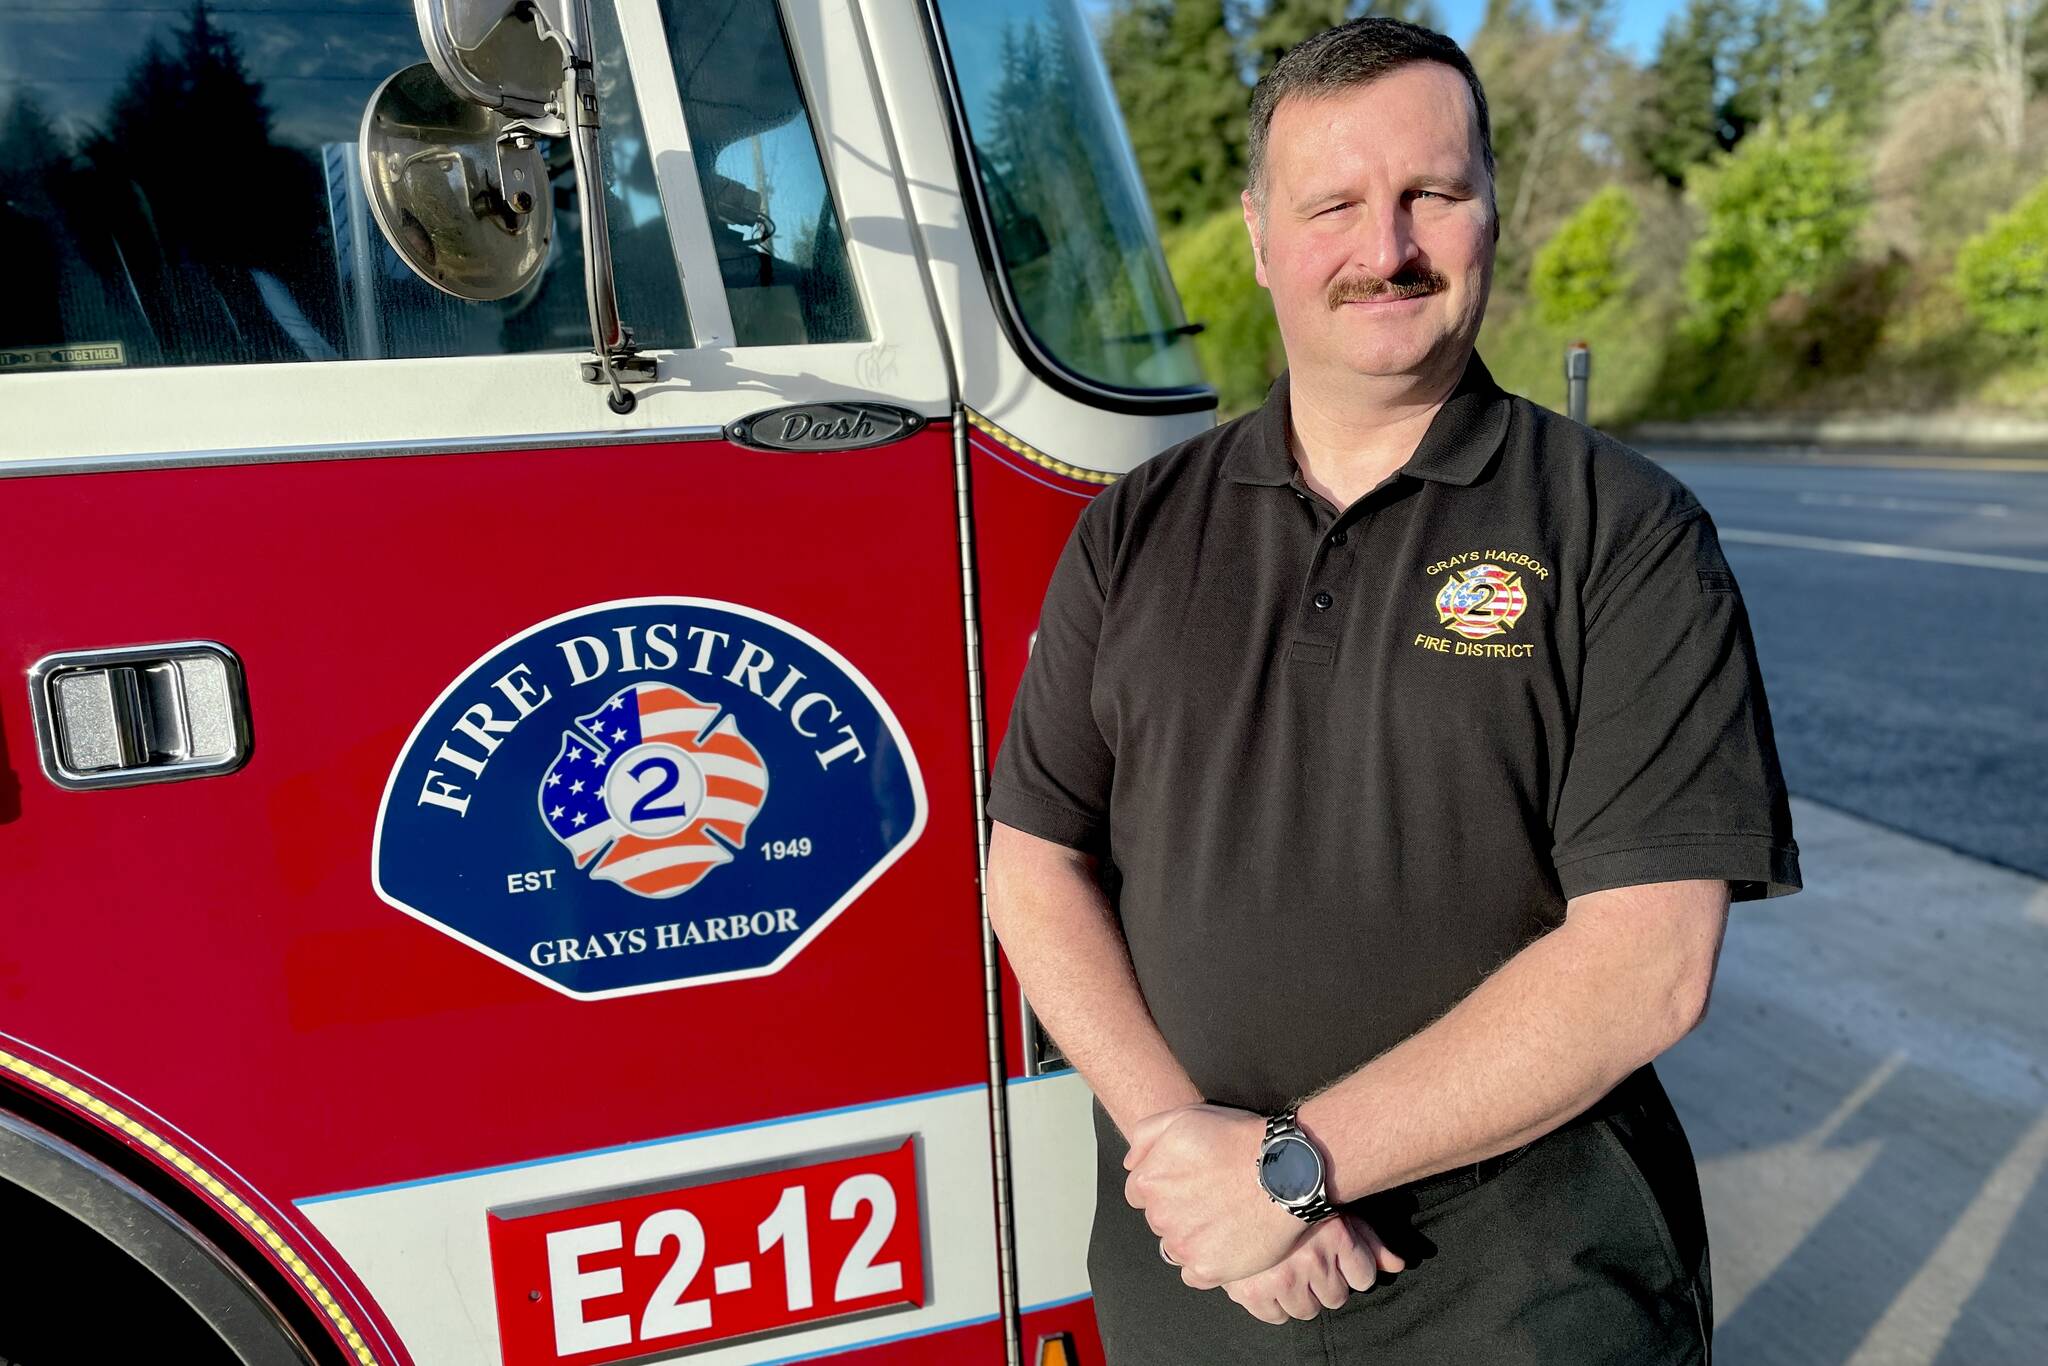 John McNutt joined Grays Harbor Fire District 2 as the new chief on Jan. 1. An Air Force veteran and former fire chief in Alaska, McNutt said one of his major priorities is working out a plan to replace the district’s vehicle fleet. (Michael S. Lockett / The Daily World)